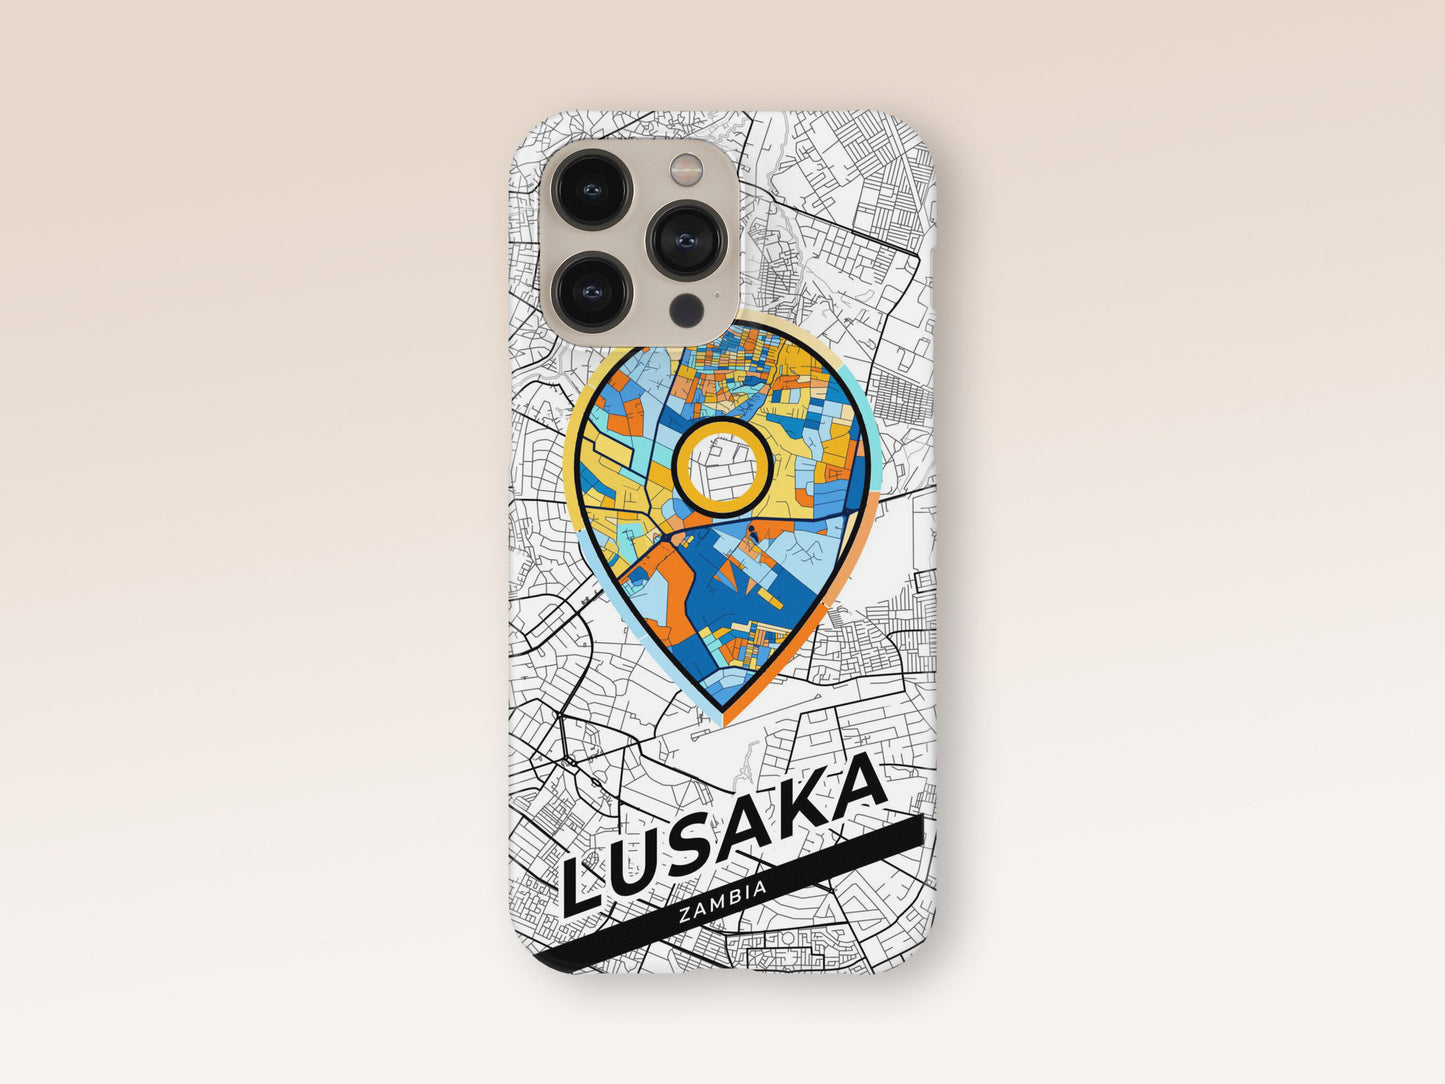 Lusaka Zambia slim phone case with colorful icon. Birthday, wedding or housewarming gift. Couple match cases. 1